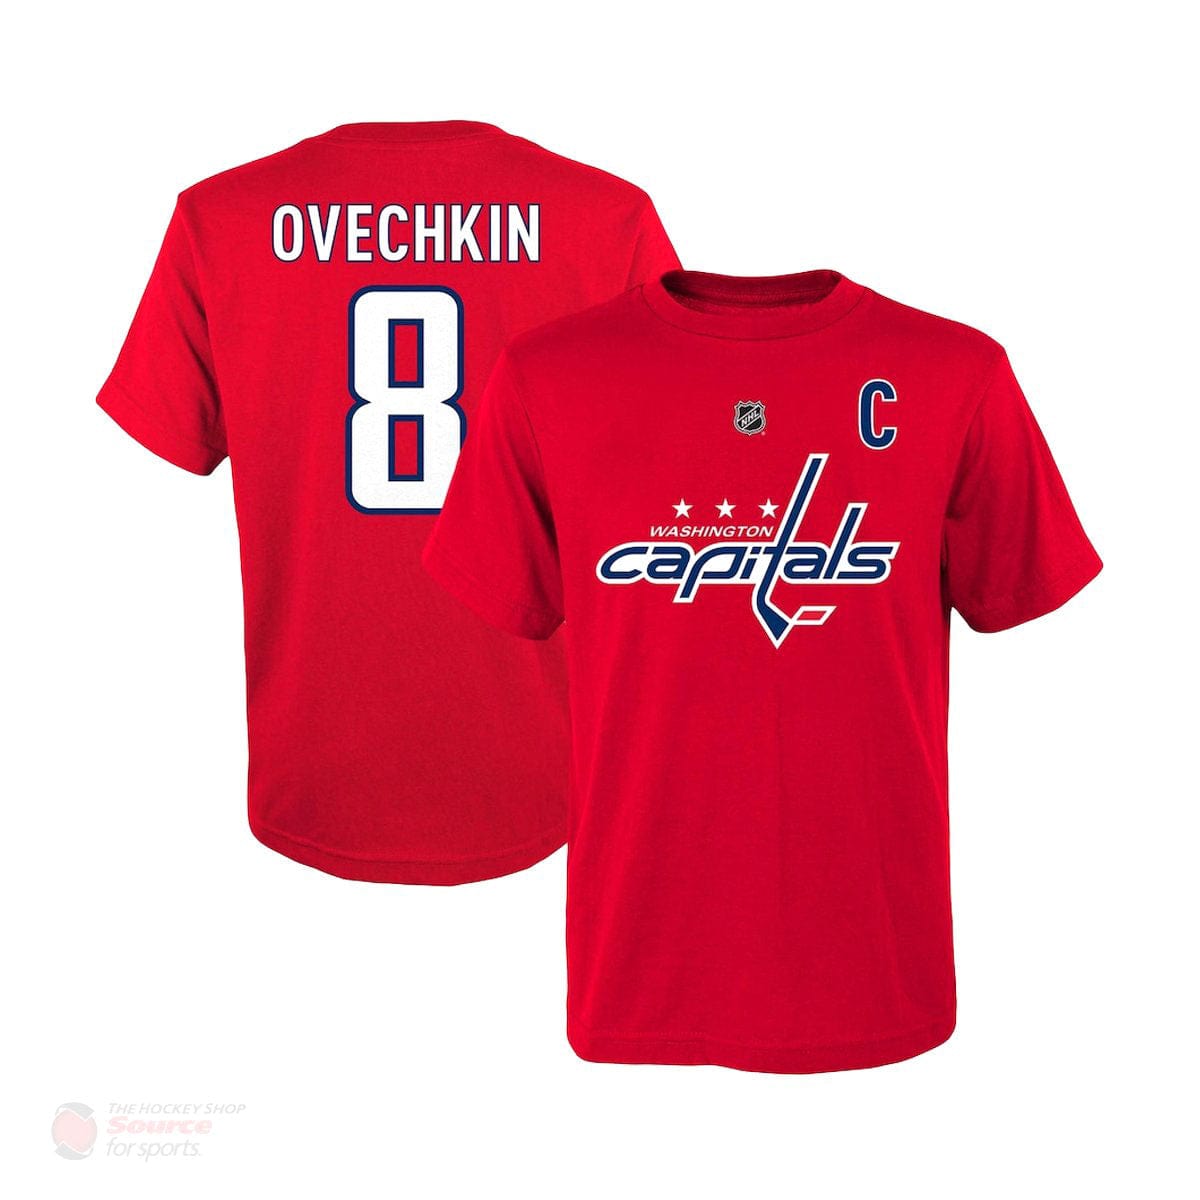 Washington Capitals Outer Stuff Name & Number Youth Shirt - Alexander Ovechkin